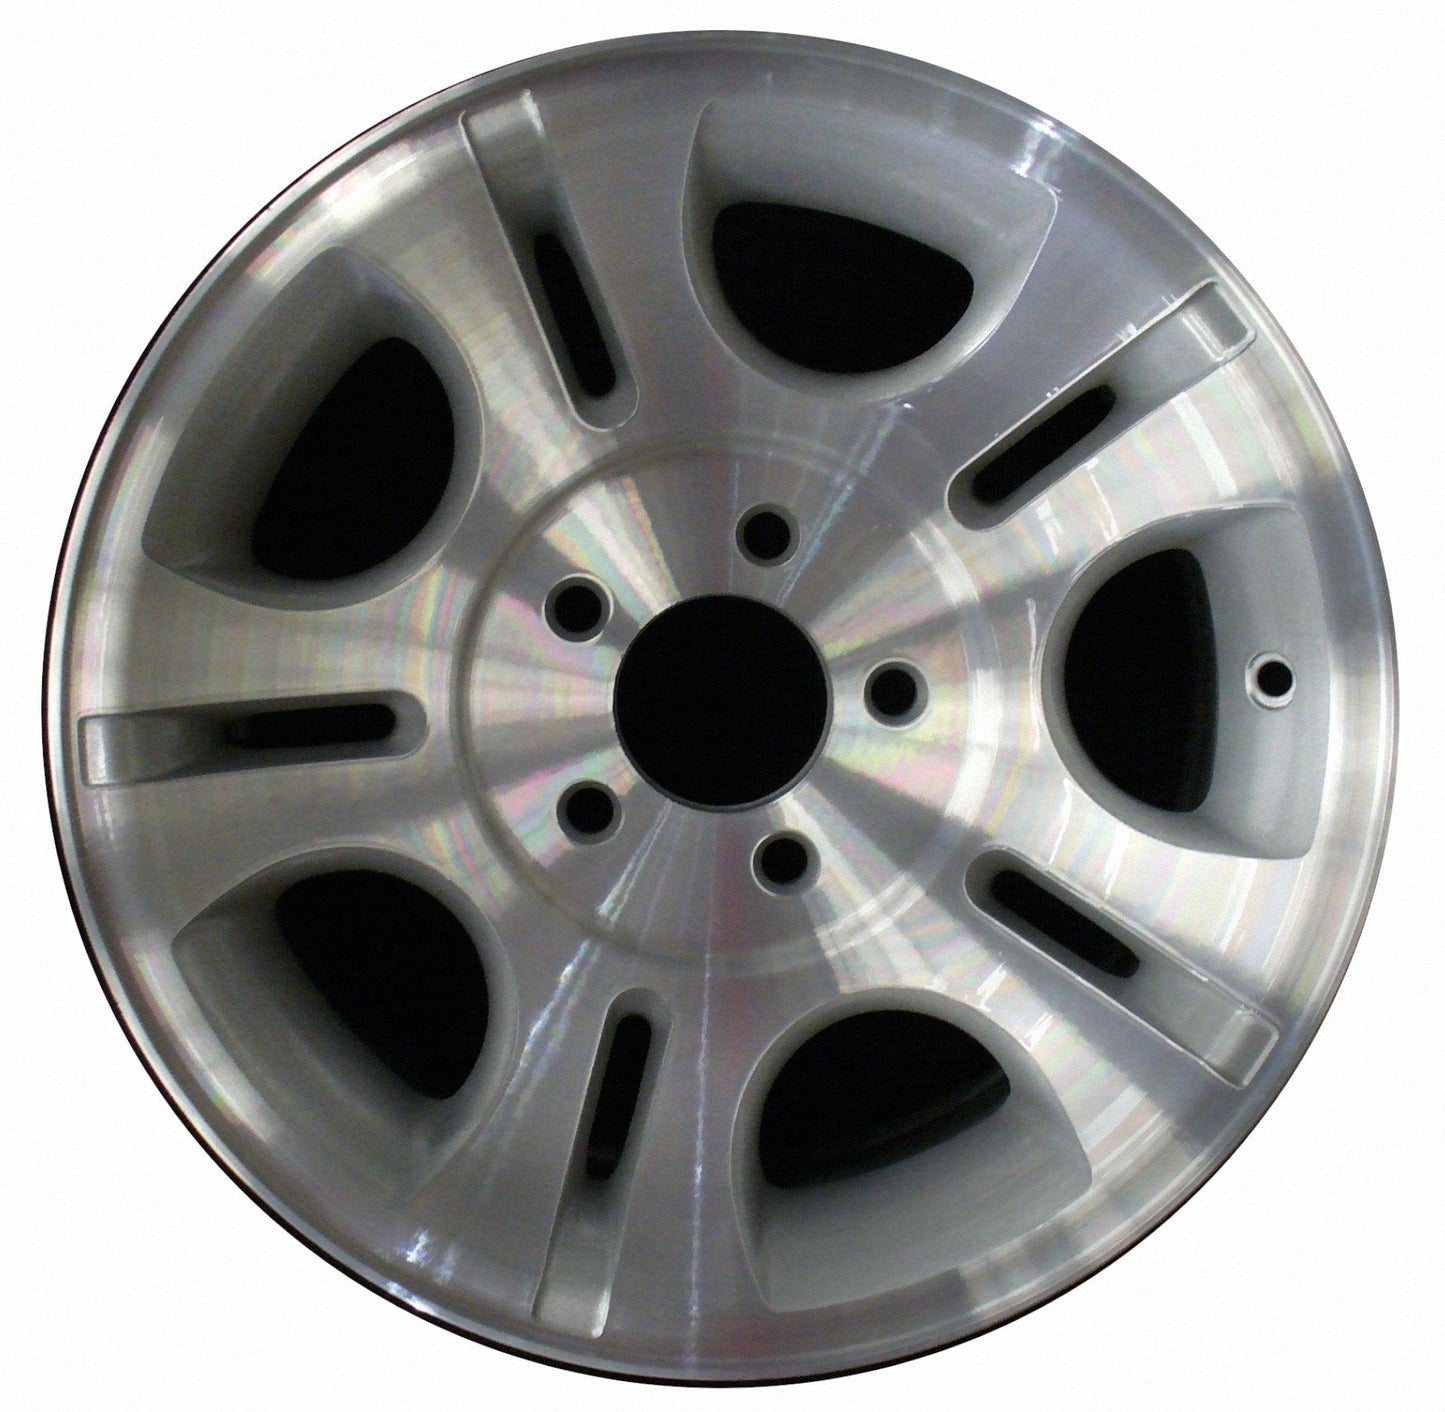 Ford Ranger  2000, 2001, 2002, 2003, 2004, 2005, 2006, 2007, 2008, 2009 Factory OEM Car Wheel Size 15x7 Alloy WAO.3431B.PS02.MA